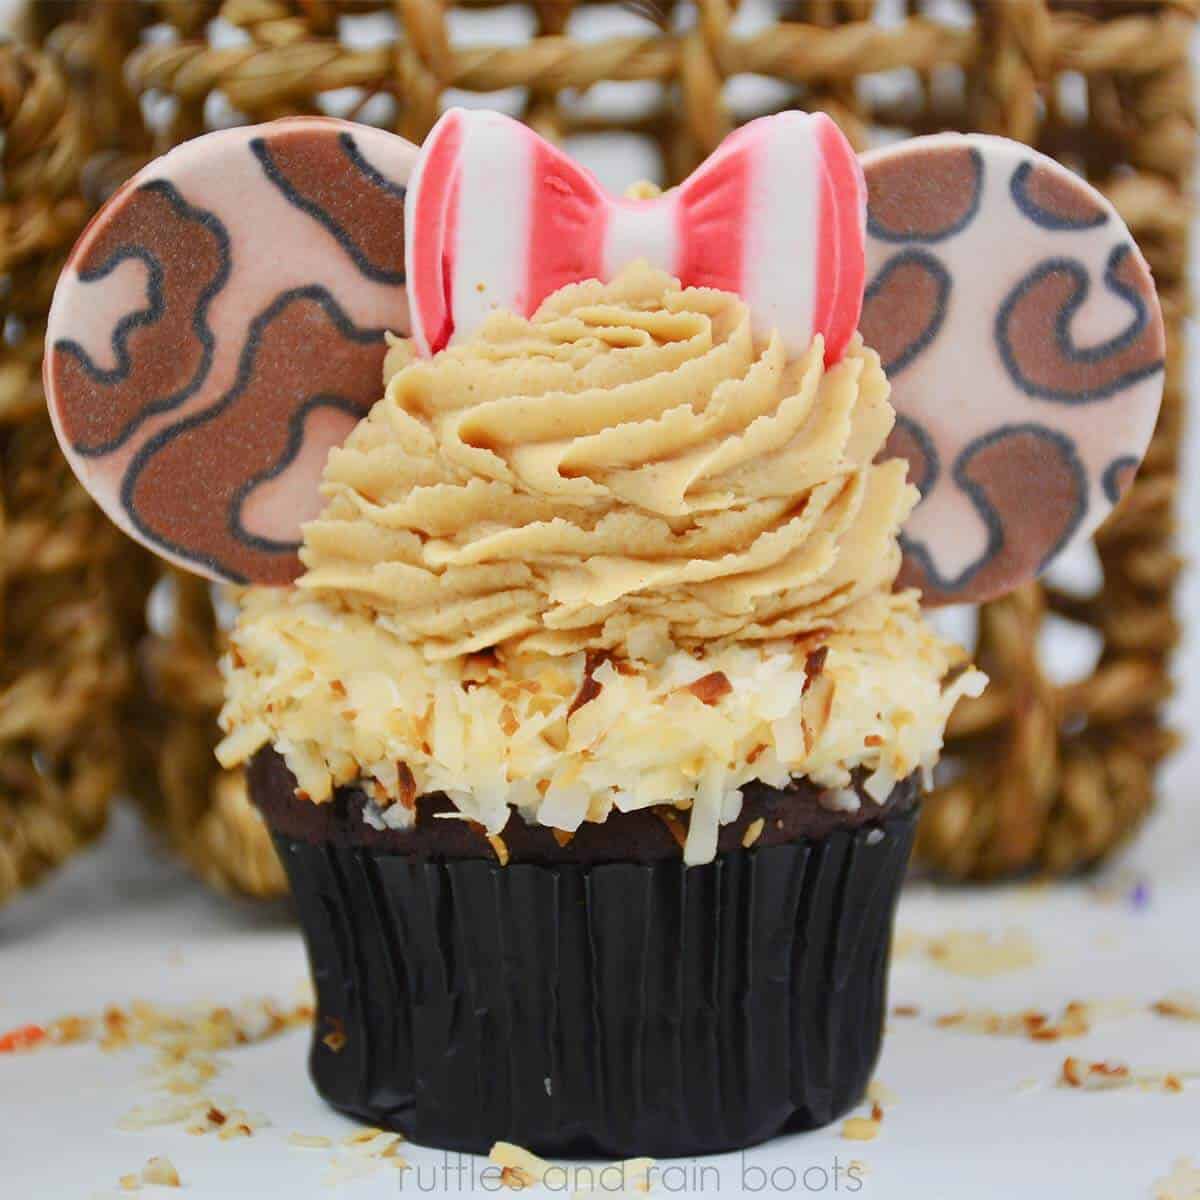 Square close up image of a safari Minnie ear cupcake with a stripe red and white bow in fondant with peanut butter frosting and coconut topped chocolate cupcake in front of a wicker basket.